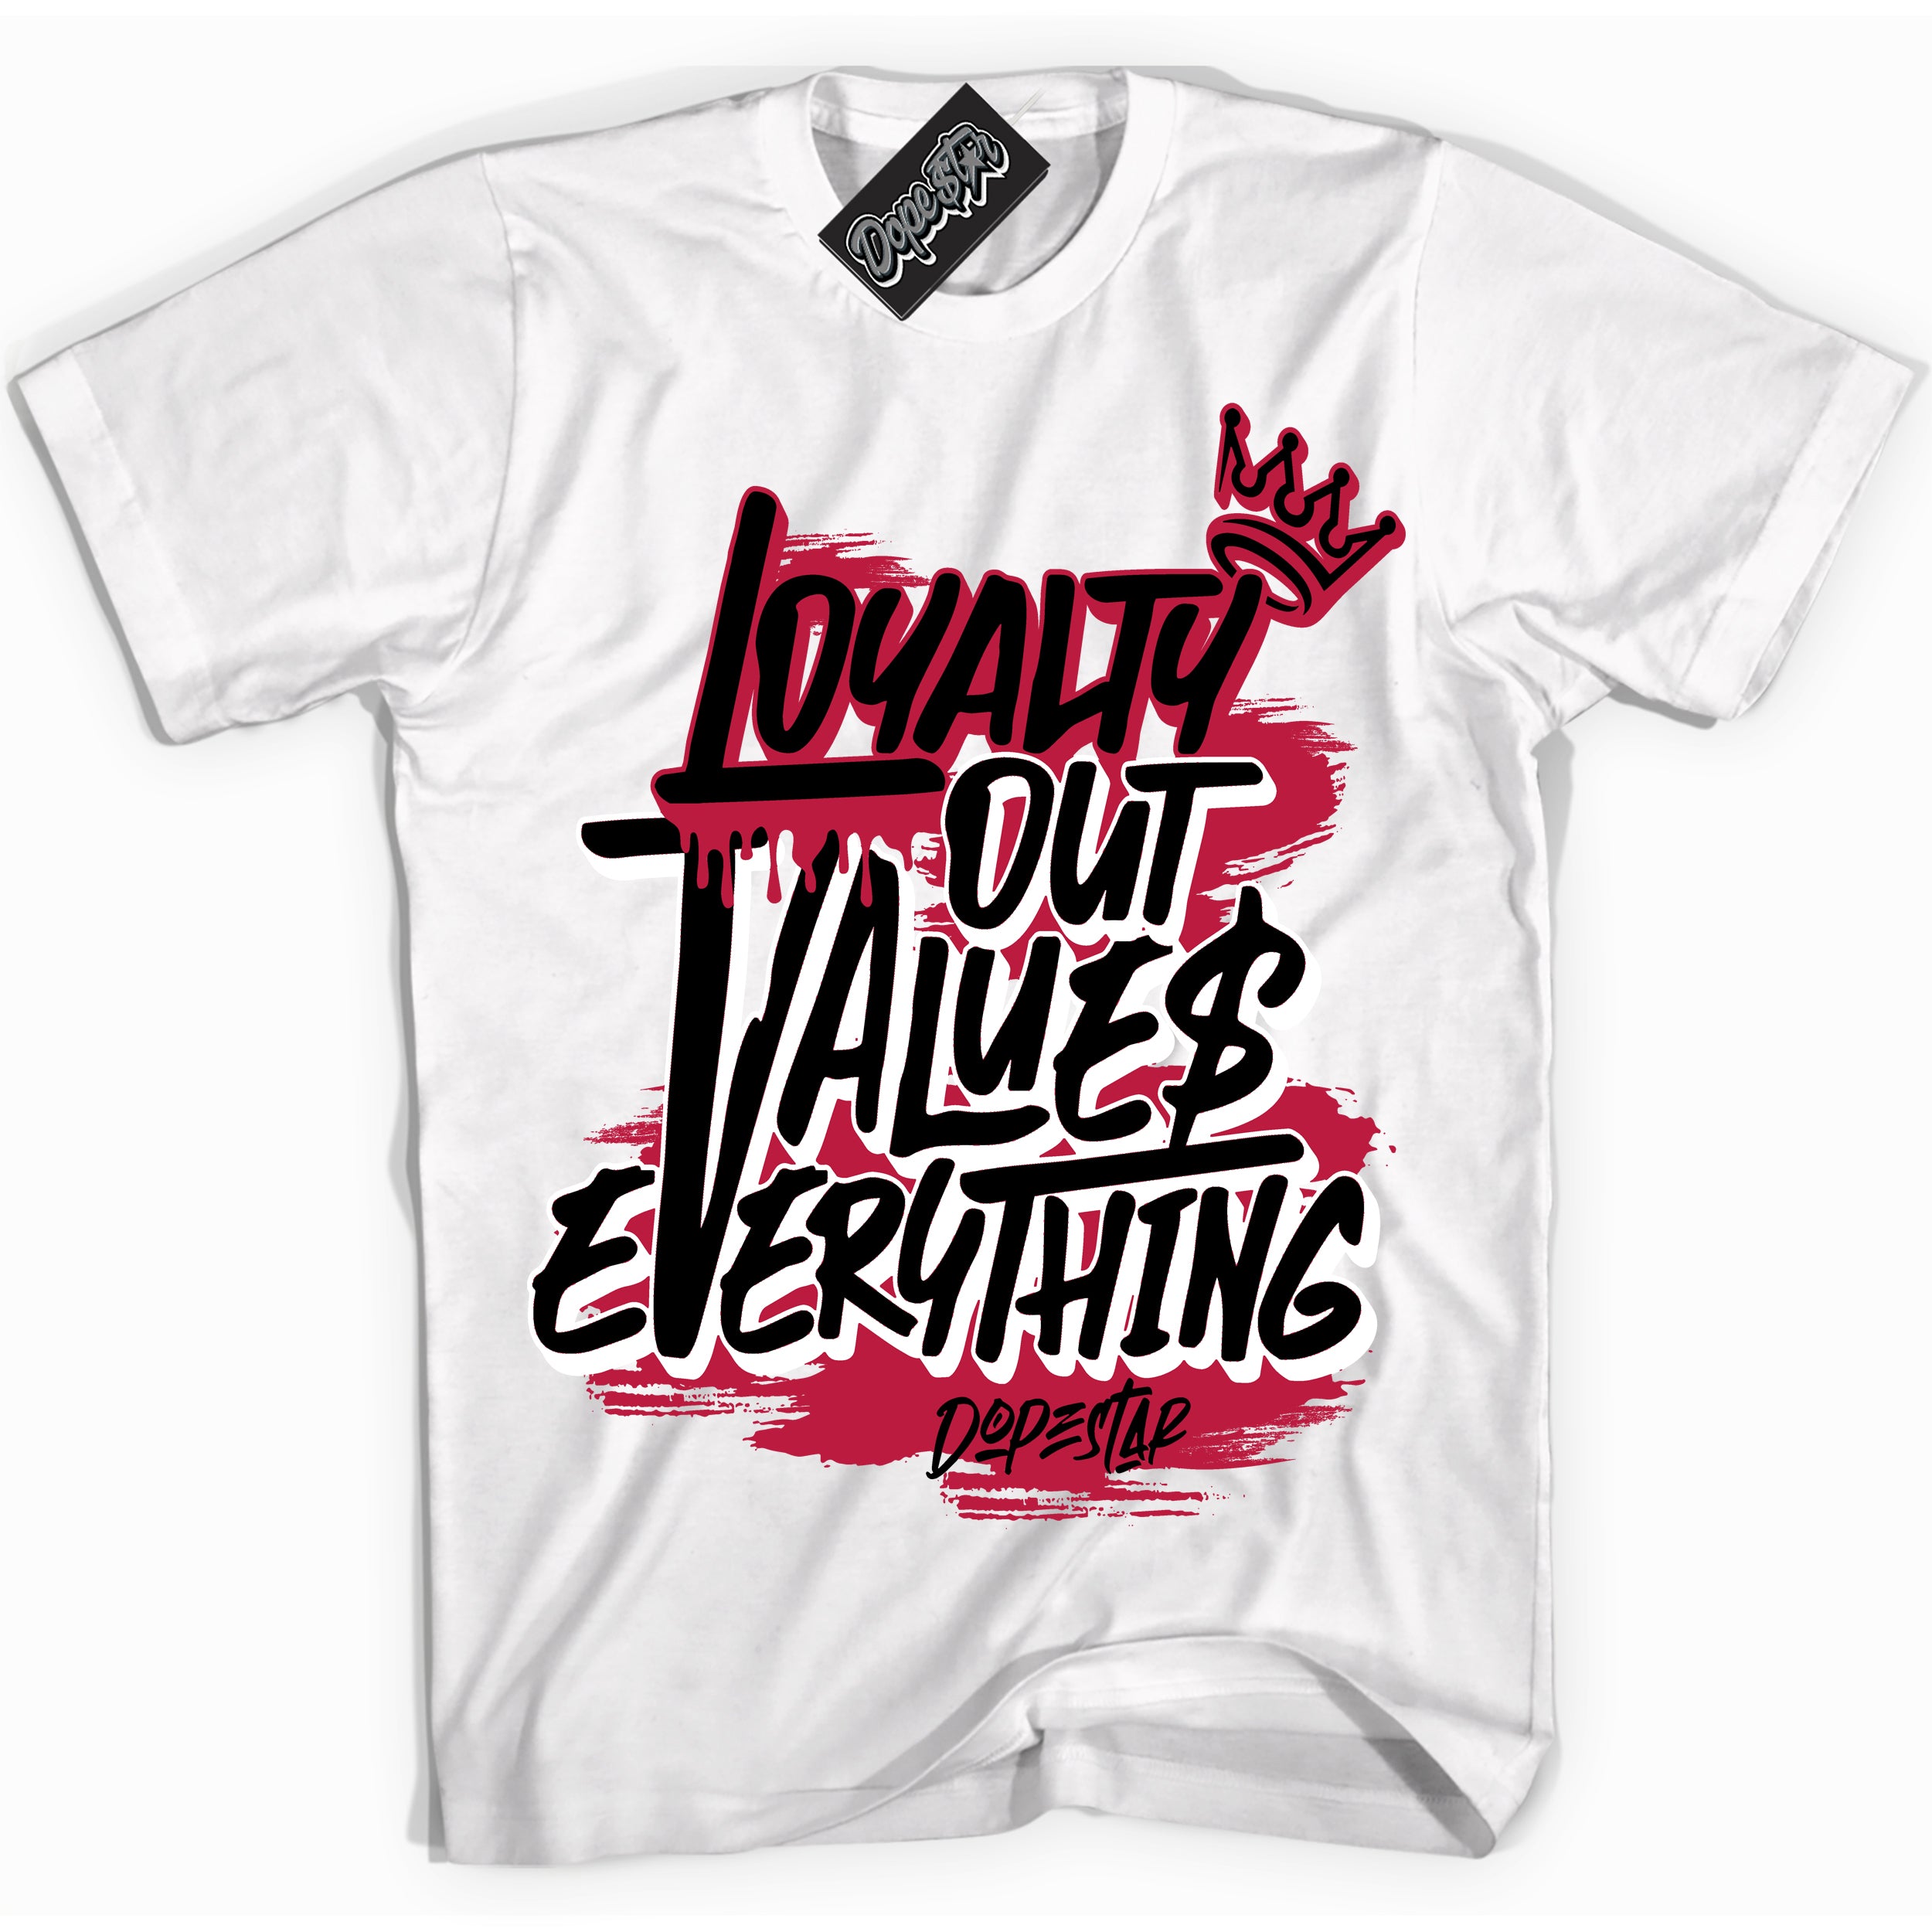 Cool White Shirt with “ Loyalty Out Values Everything” design that perfectly matches Alternate Bred 2022 1s Sneakers.